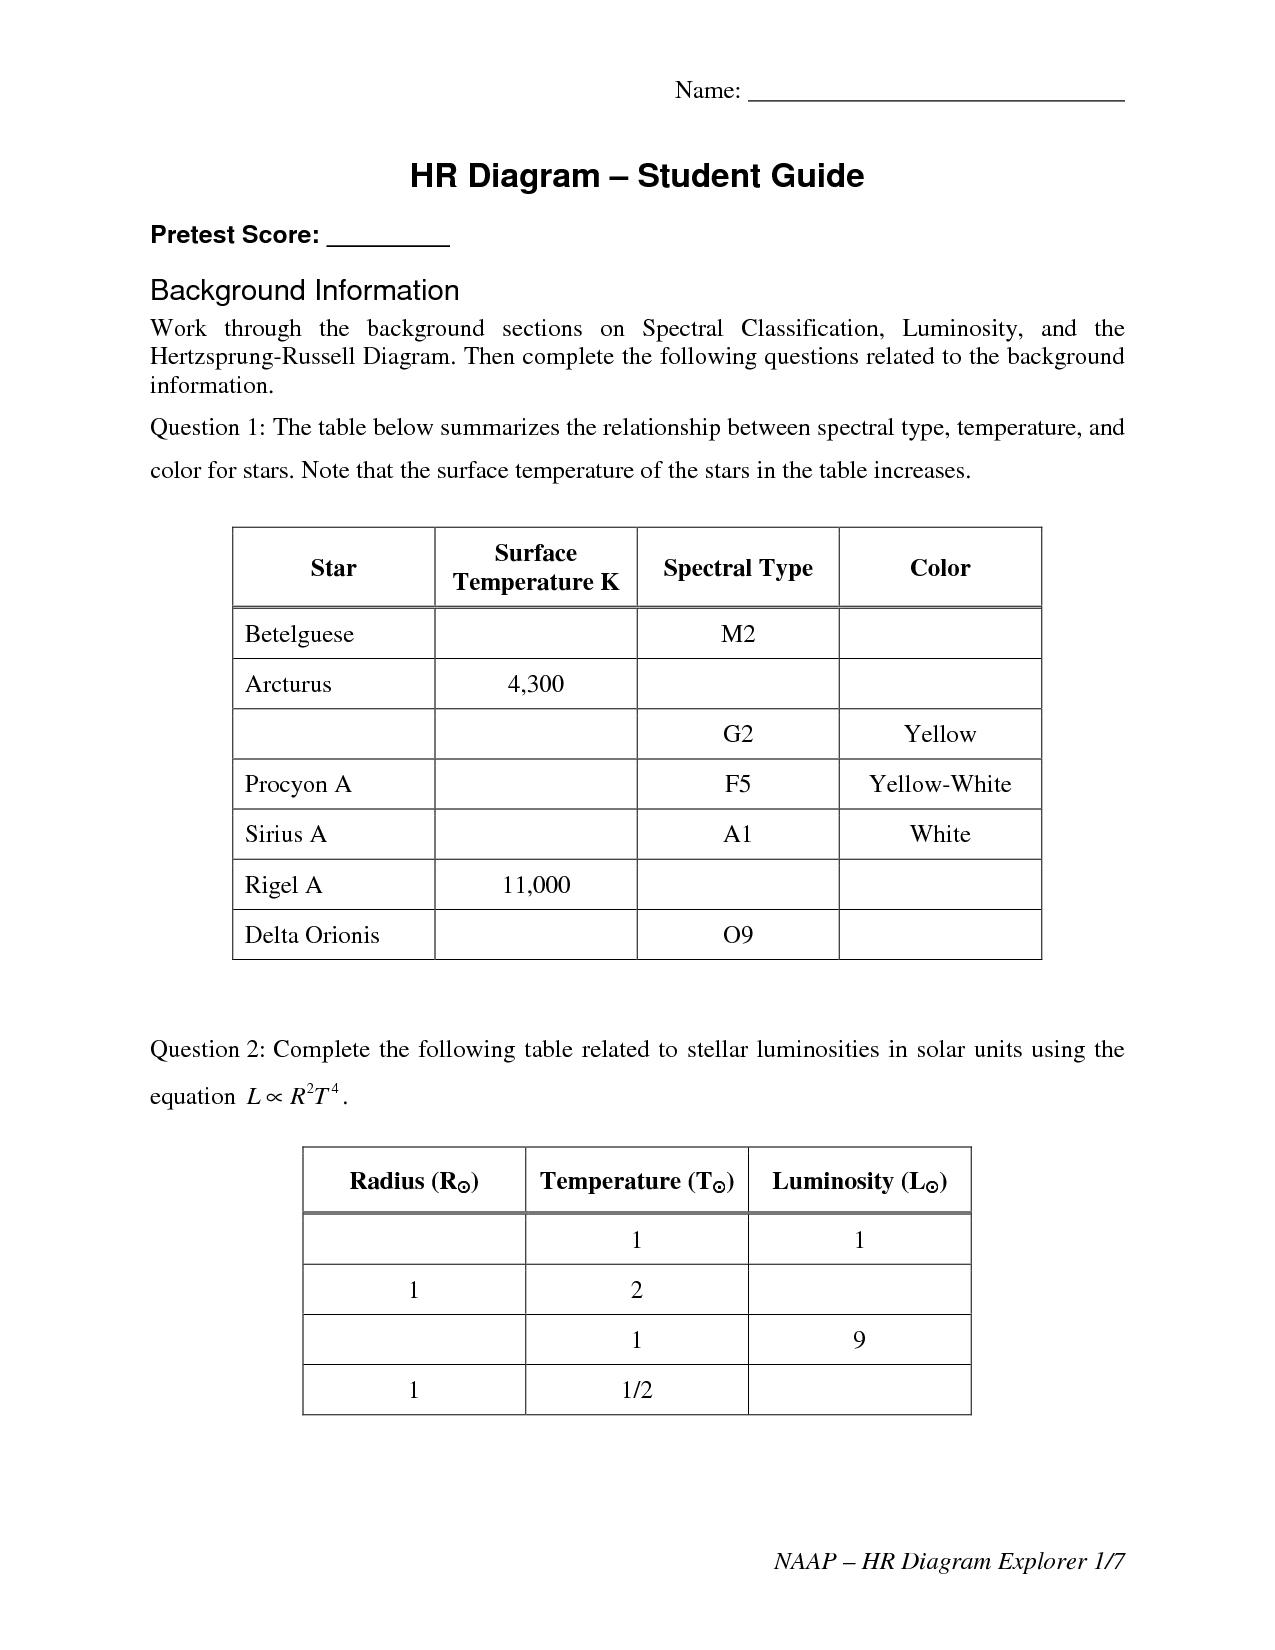 11 Best Images Of H R Diagram Worksheet Answers